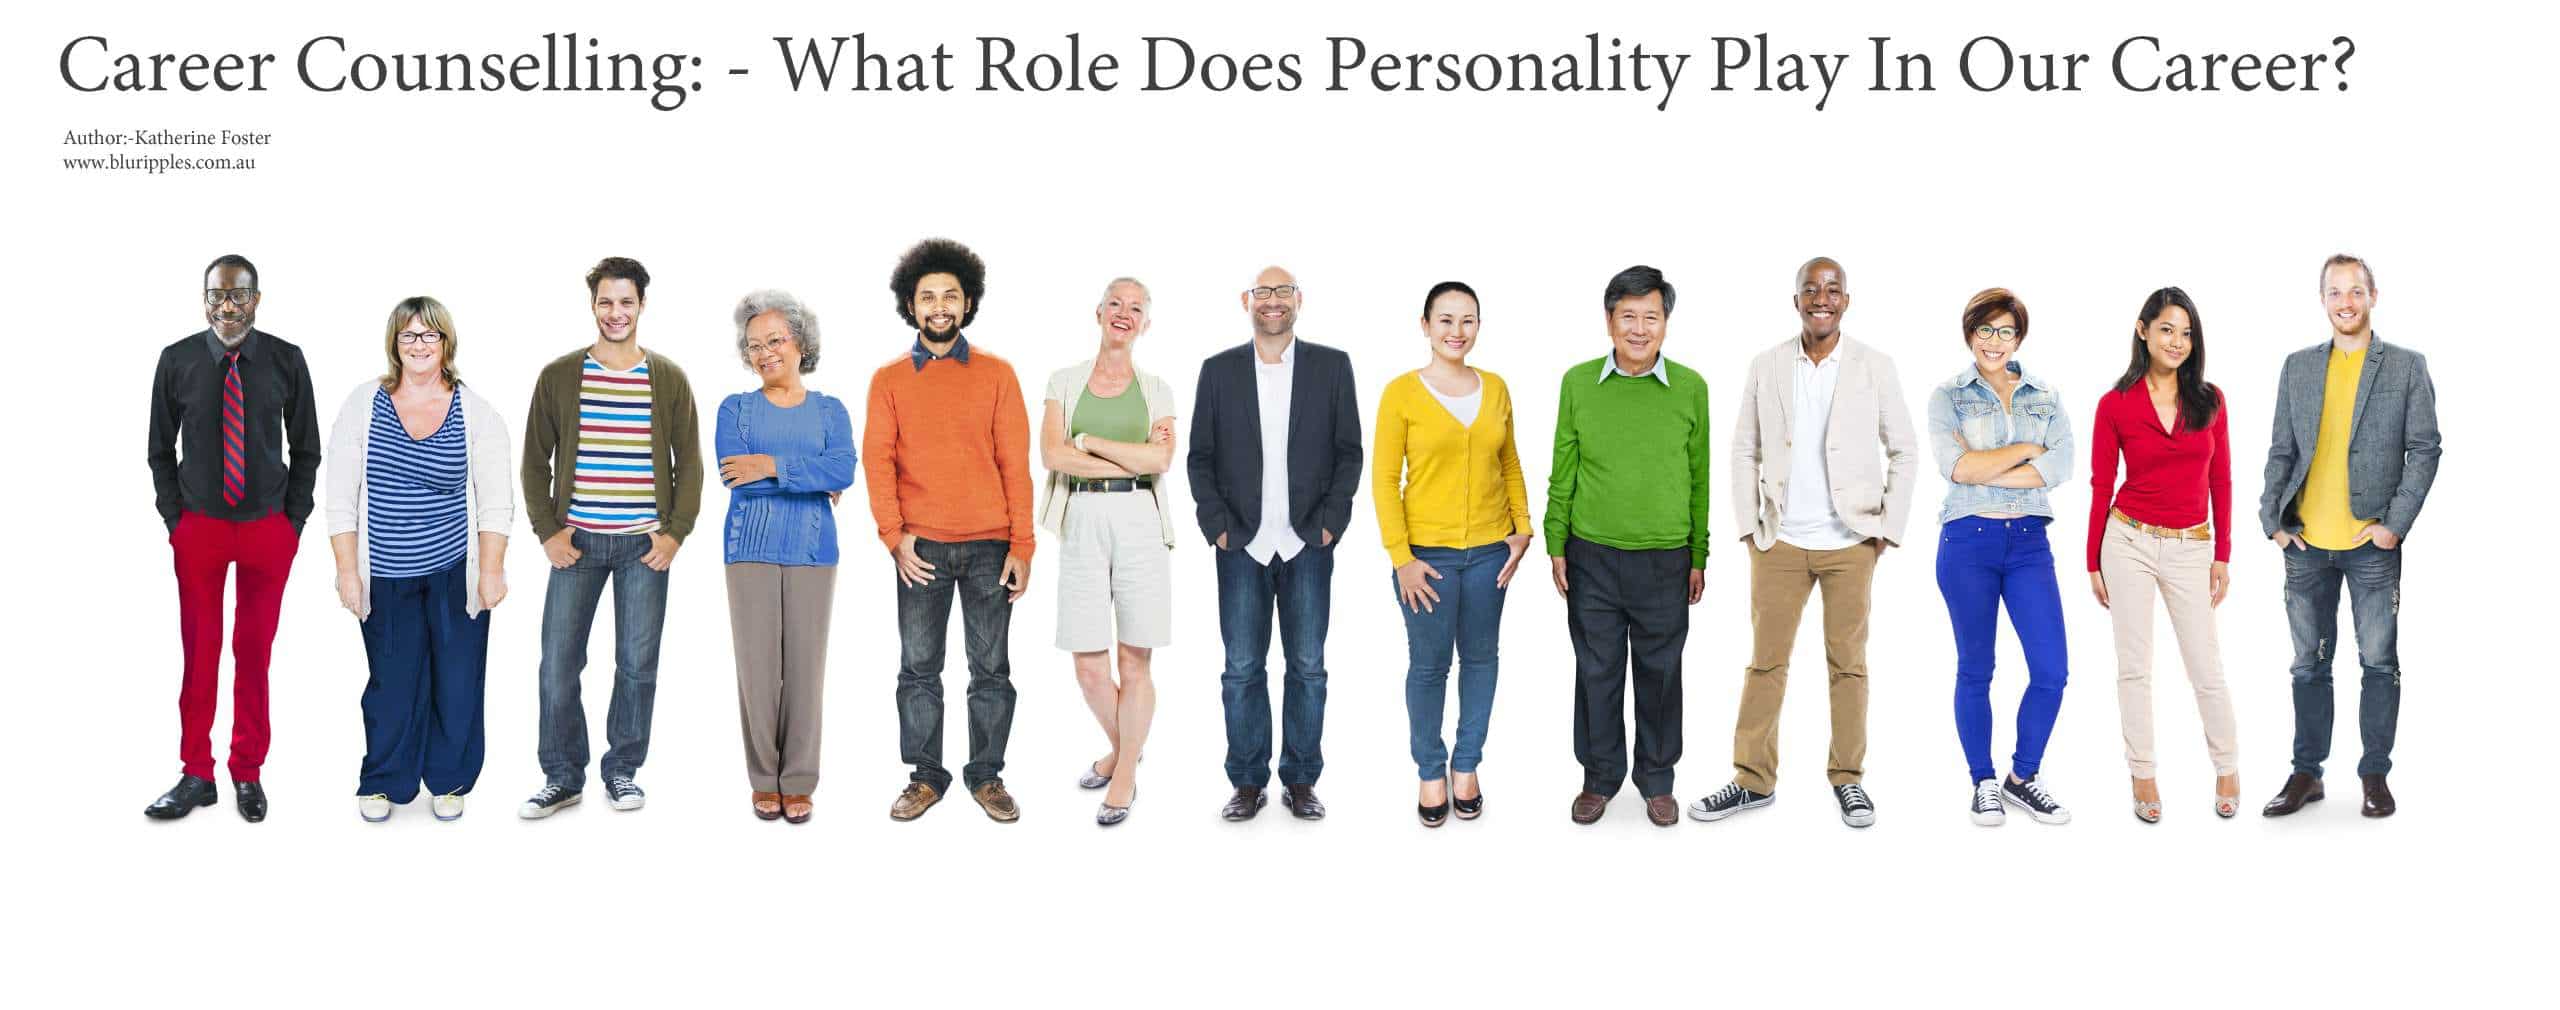 Career Counselling - What Role Does Personality Play In Our Career